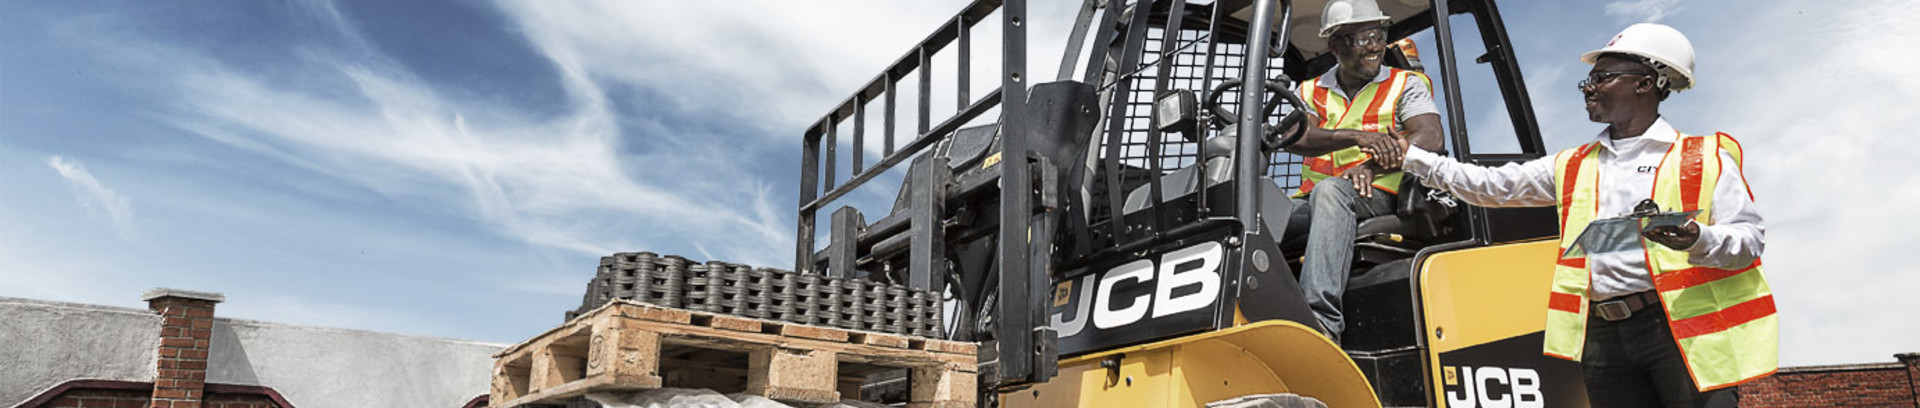 Buy a JCB Teletruk Forklift Today from a Brand-approved dealer.